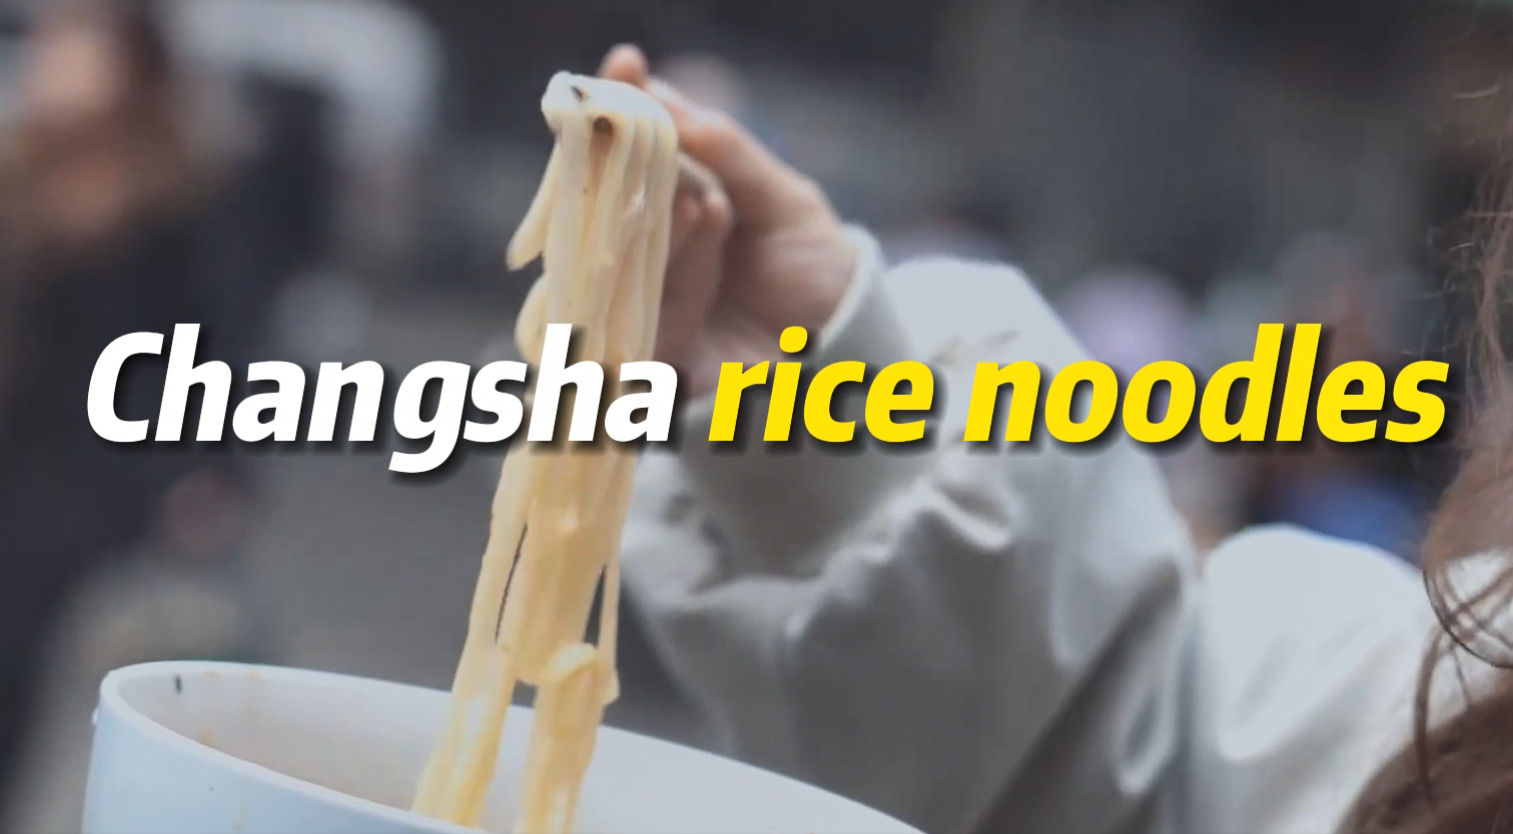 A bowl of rice noodles, a taste of Changsha city